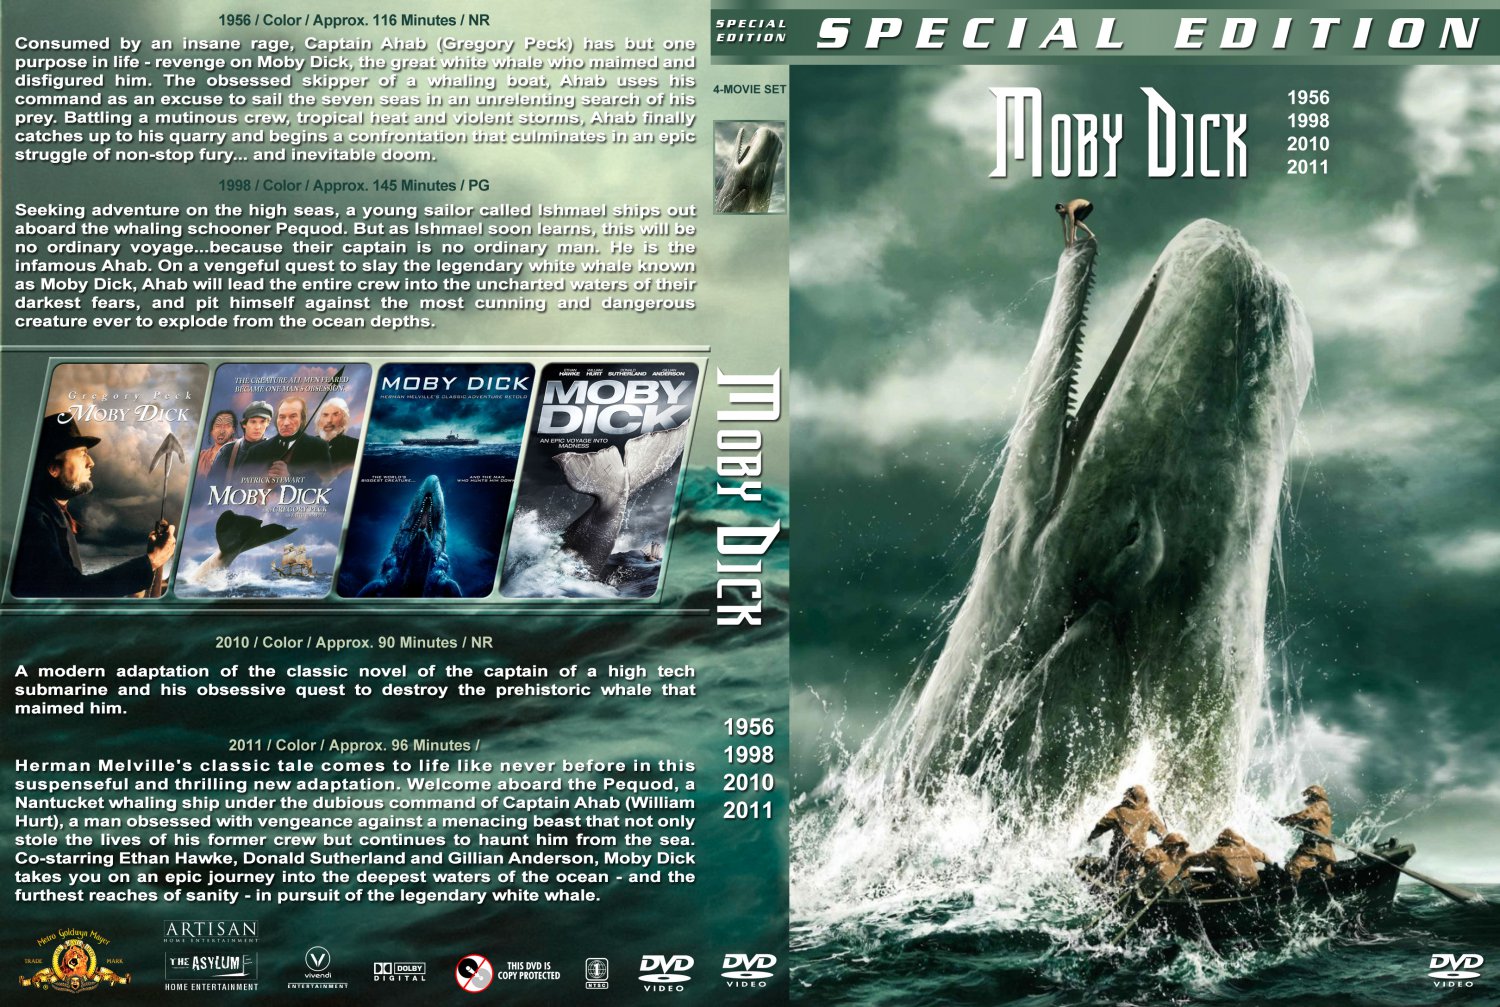 Moby dick appears movie